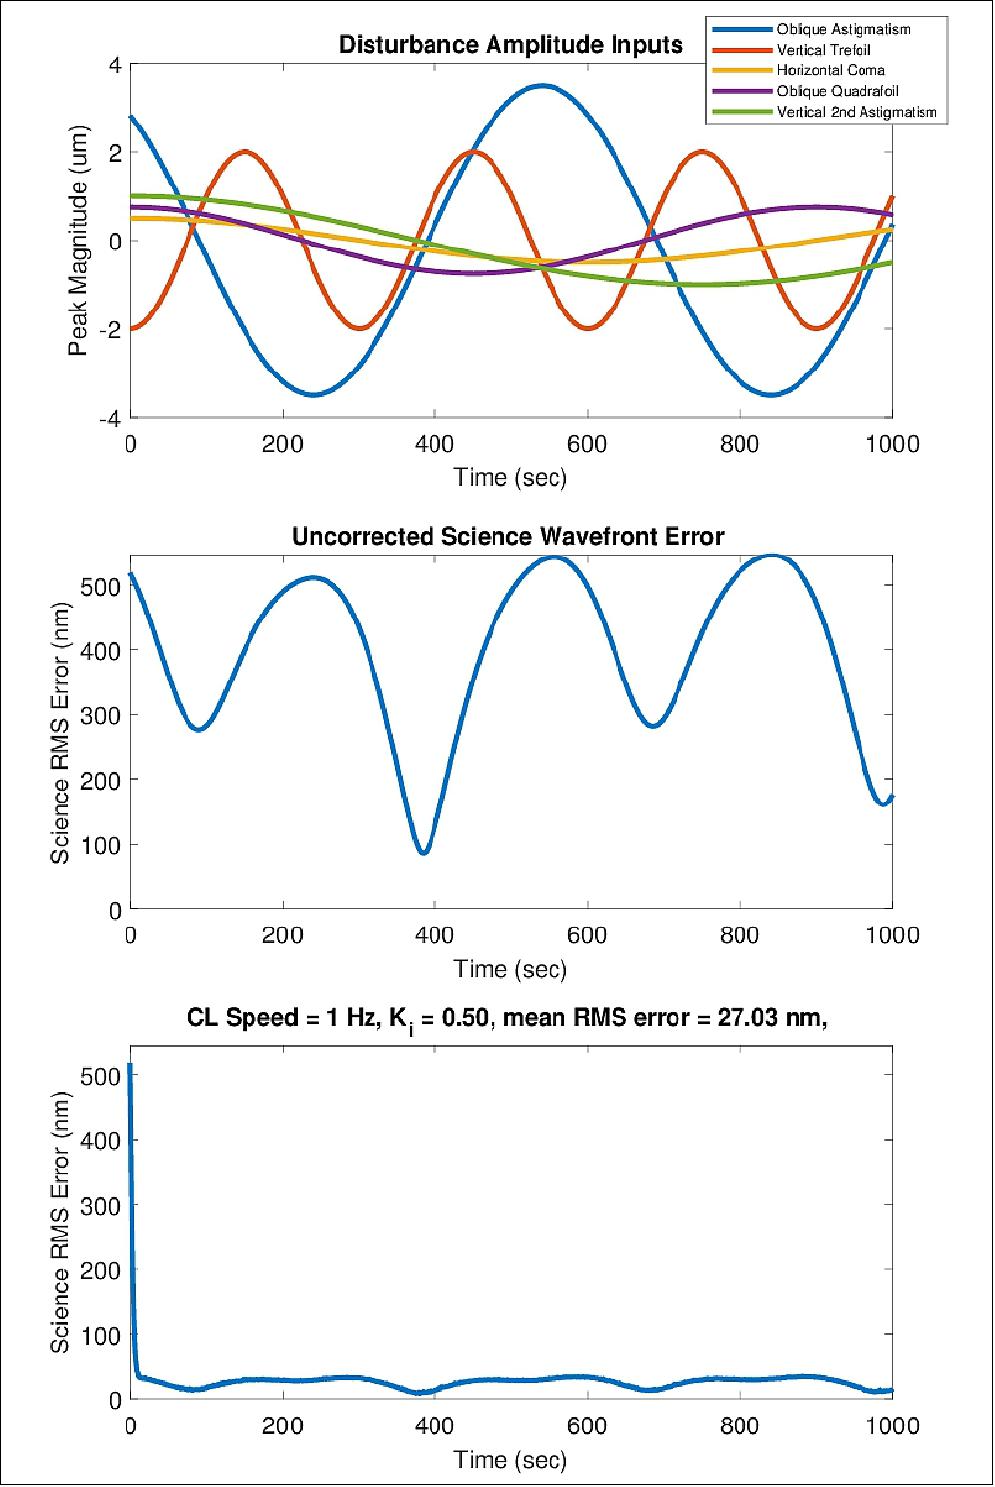 Figure 14: Results of simulating a 1 Hz zonal control loop against high spatial frequency disturbances shown in the top plot. Middle plot shows the varying RMS error at the image plane if no control is used. The bottom plot shows science wavefront error correction, with control integrator gain, and error mean. The resulting mean RMS wavefront error is 27.03nm, with RMS error below 25 nm over 95% of the 1000 second simulation time (image credit: DeMi Team)